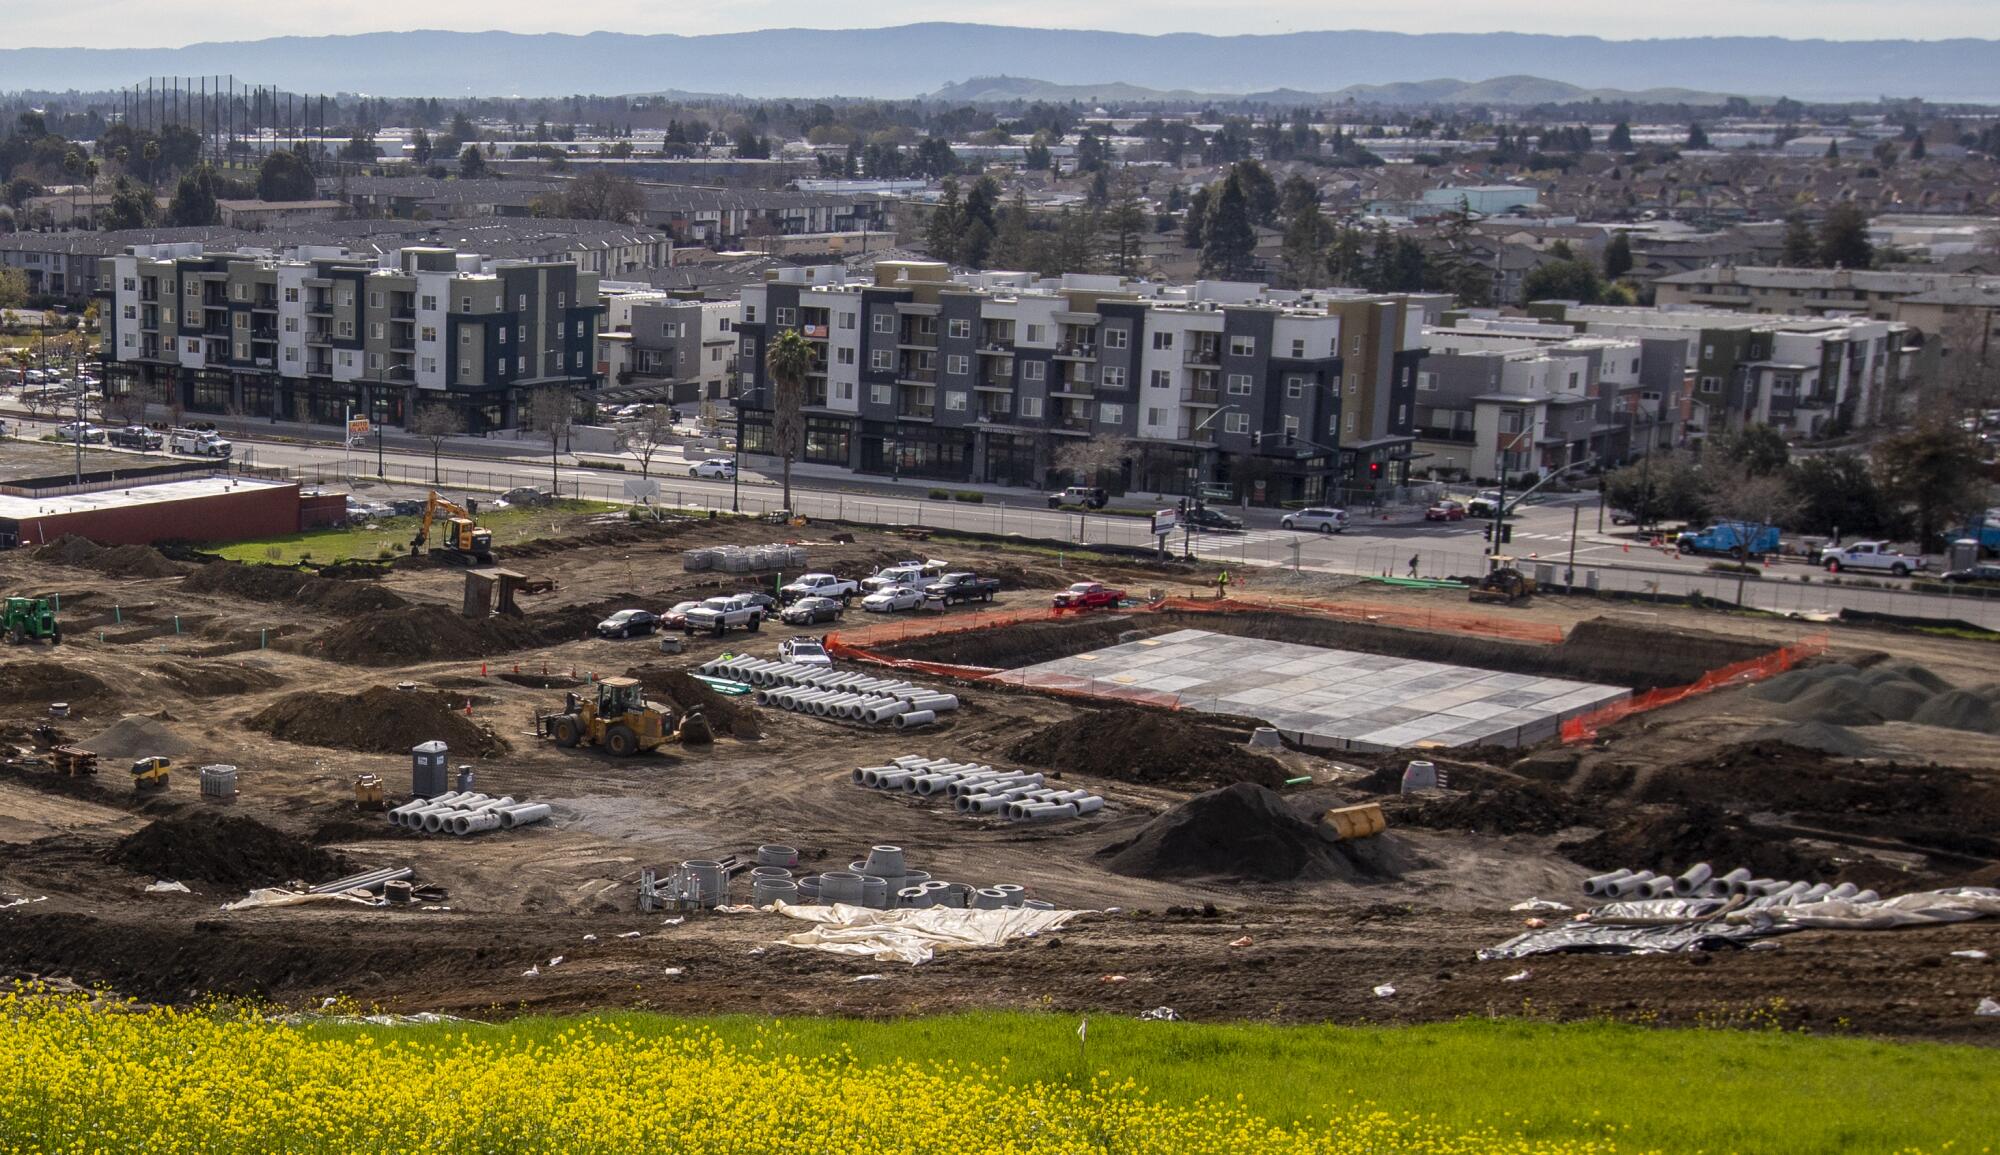 In the background, a new development project is under construction on former Caltrans-owned land in Hayward. 